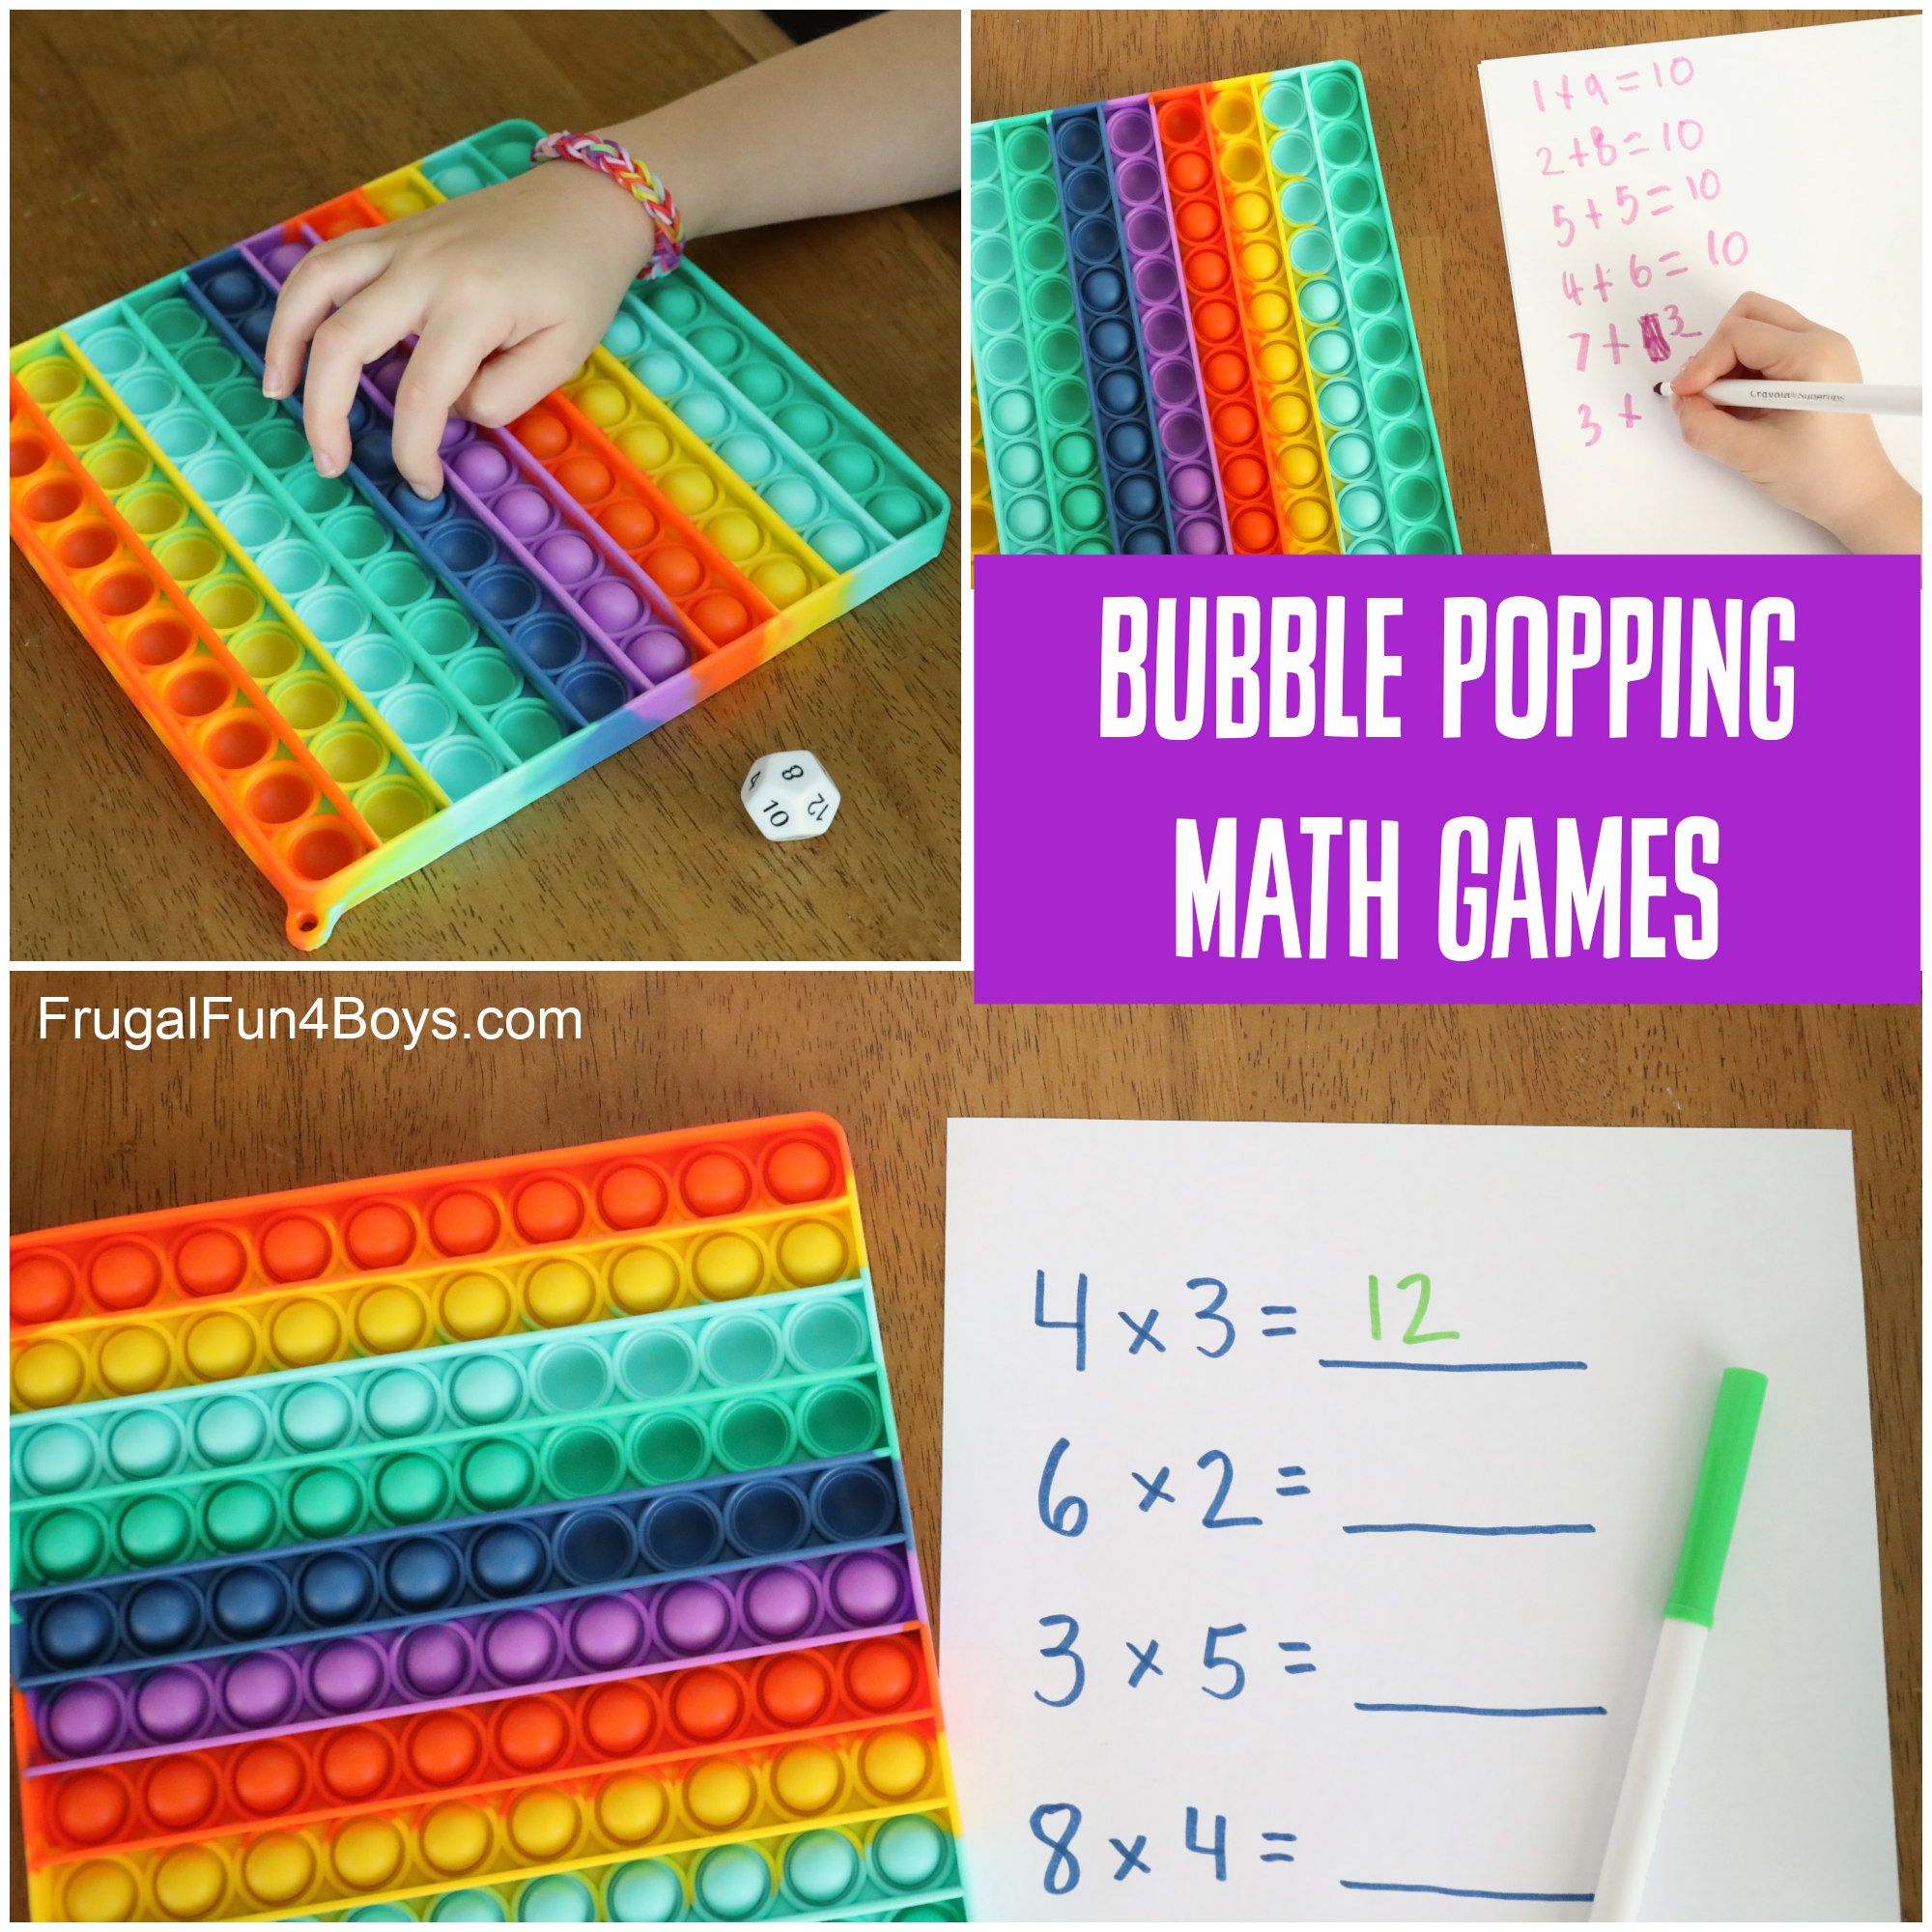 Kingmall Math Toys P0p with Numbers Big Size P0pp with Numbers Rainbow Square Fidgett Ttoy 100bubbles Learning Tool for Teachers to Create Kinds of Math Manipulatives【with 1-100 Numbers Tables】 